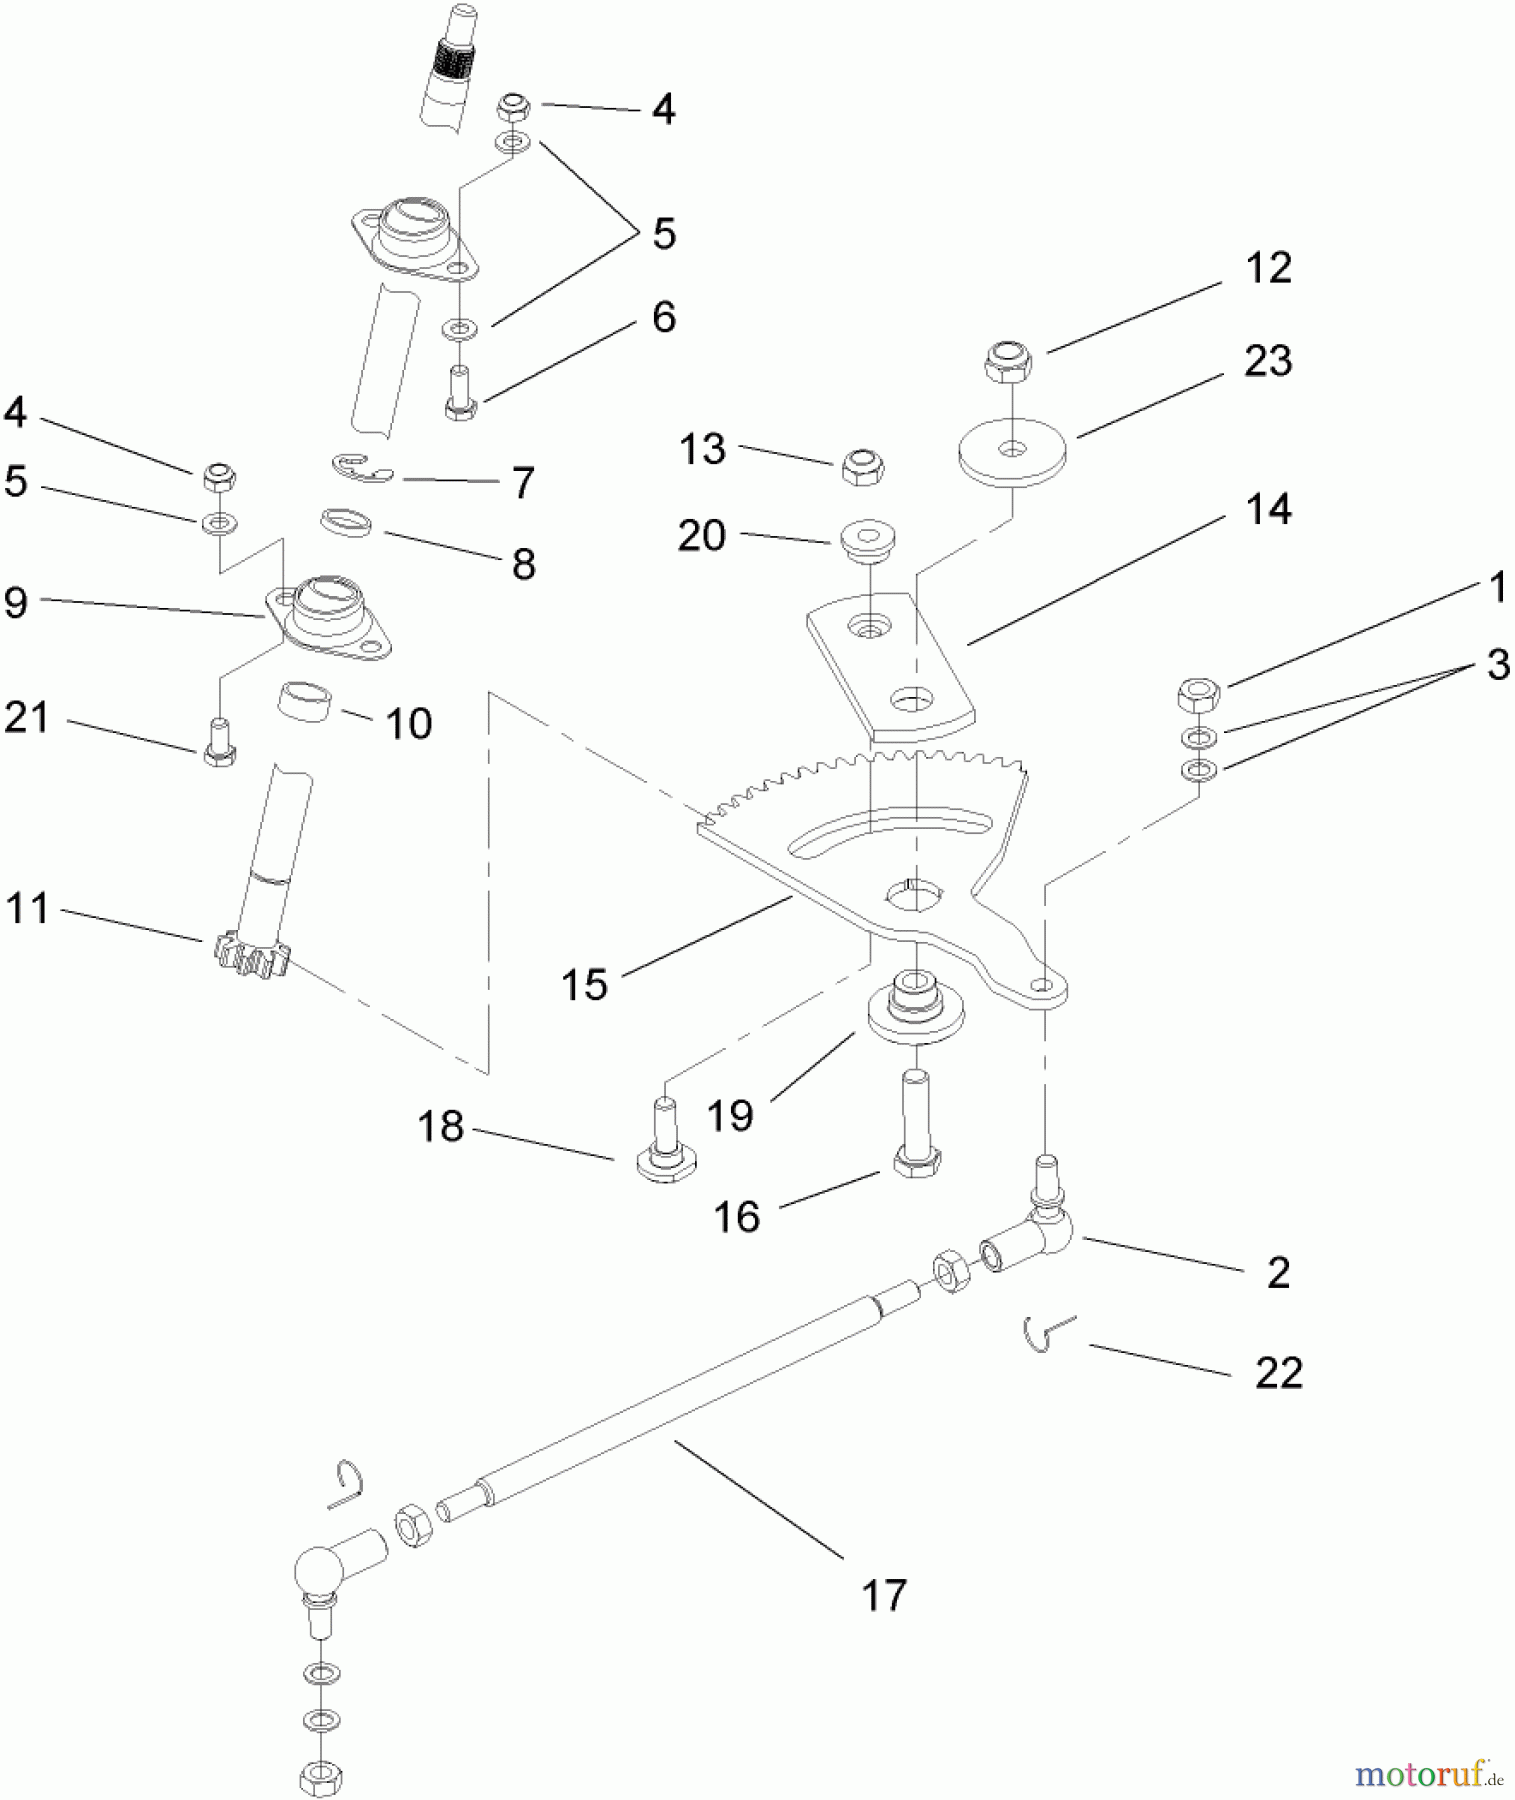  Toro Neu Mowers, Lawn & Garden Tractor Seite 1 74592 (DH 220) - Toro DH 220 Lawn Tractor, 2007 (270000001-270000651) STEERING ASSEMBLY